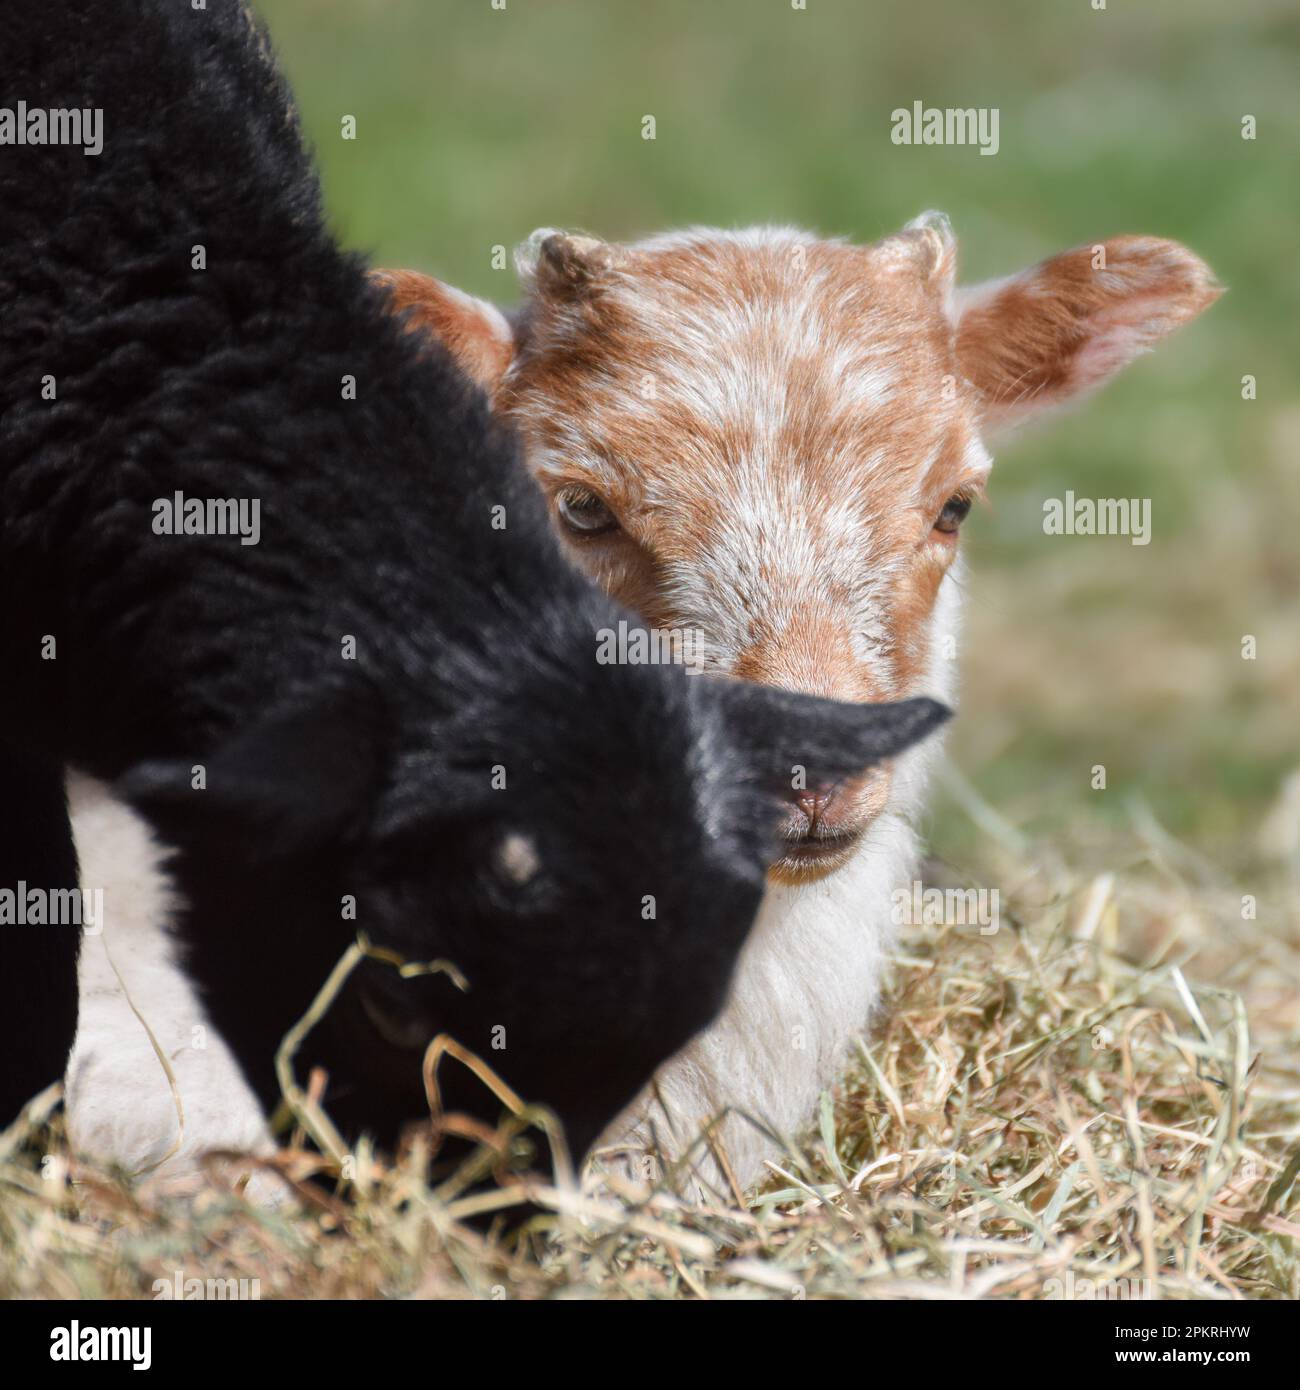 Cute newborn sheep (lambs) on a sunny day in spring Stock Photo